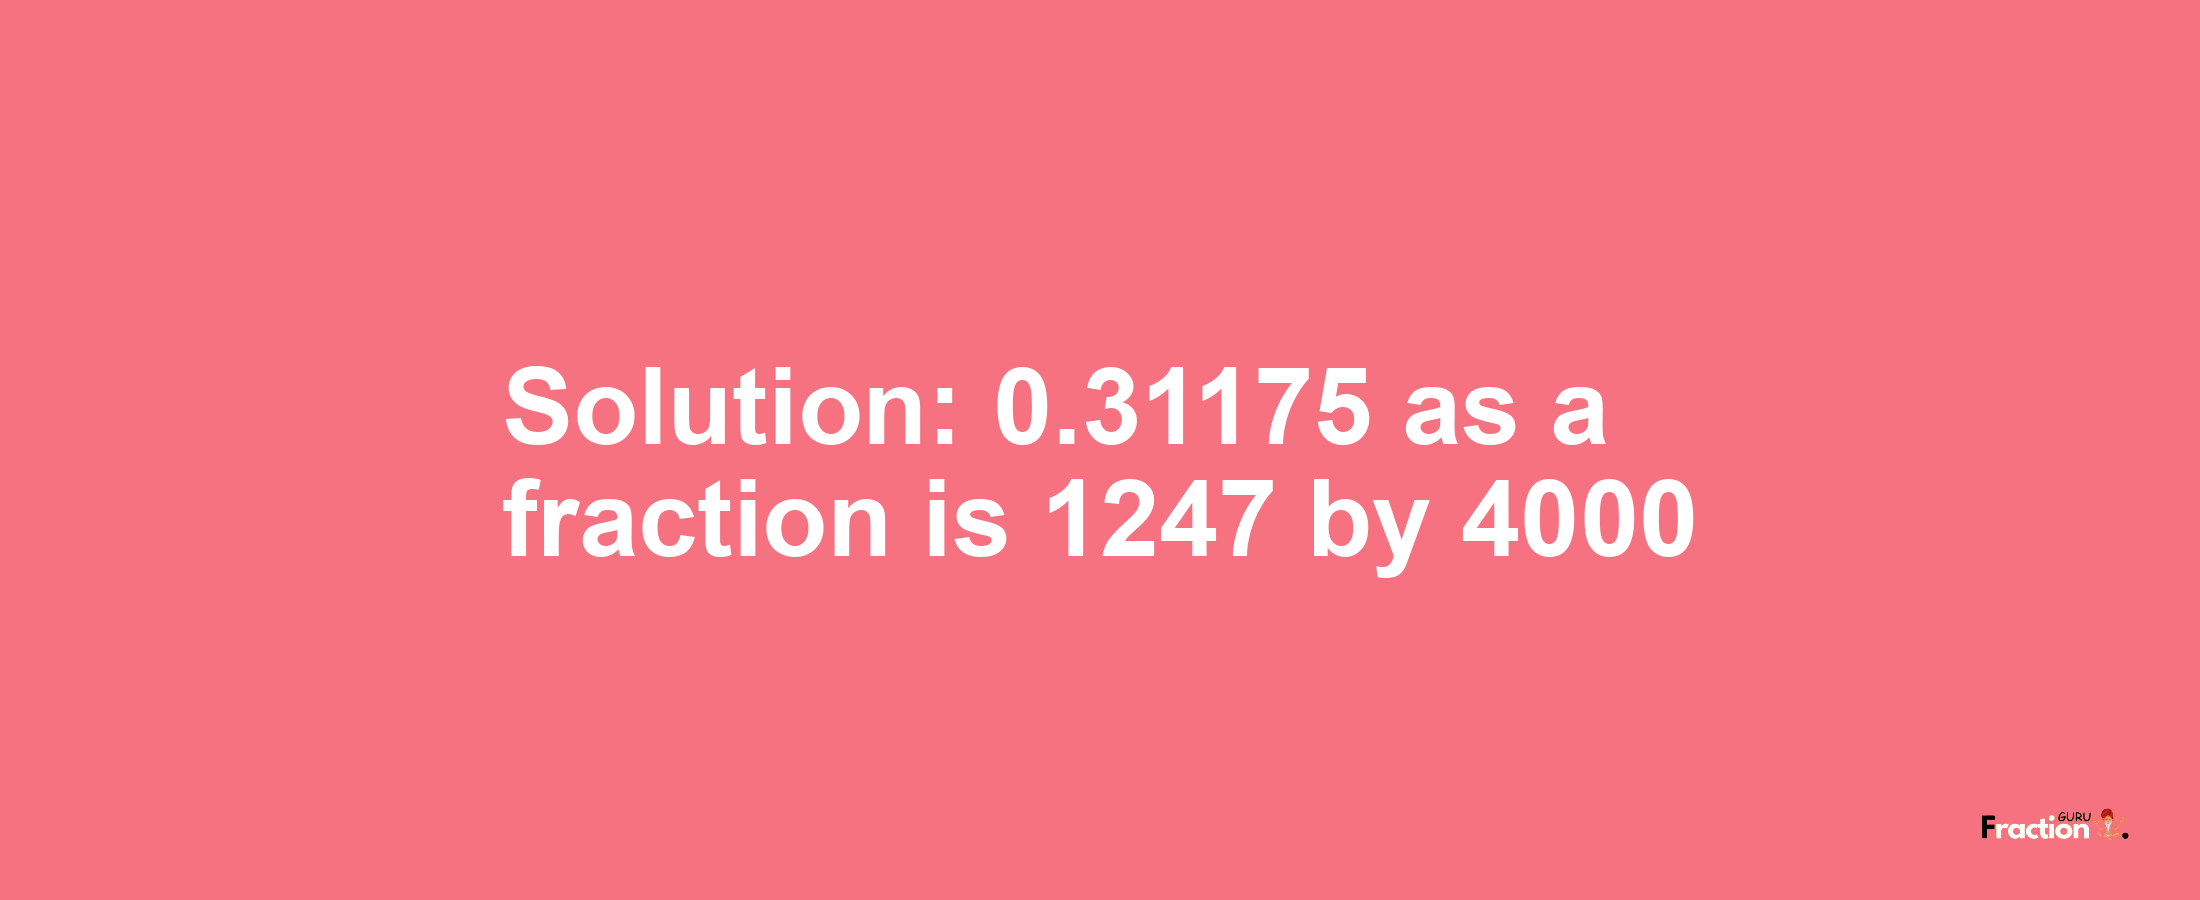 Solution:0.31175 as a fraction is 1247/4000